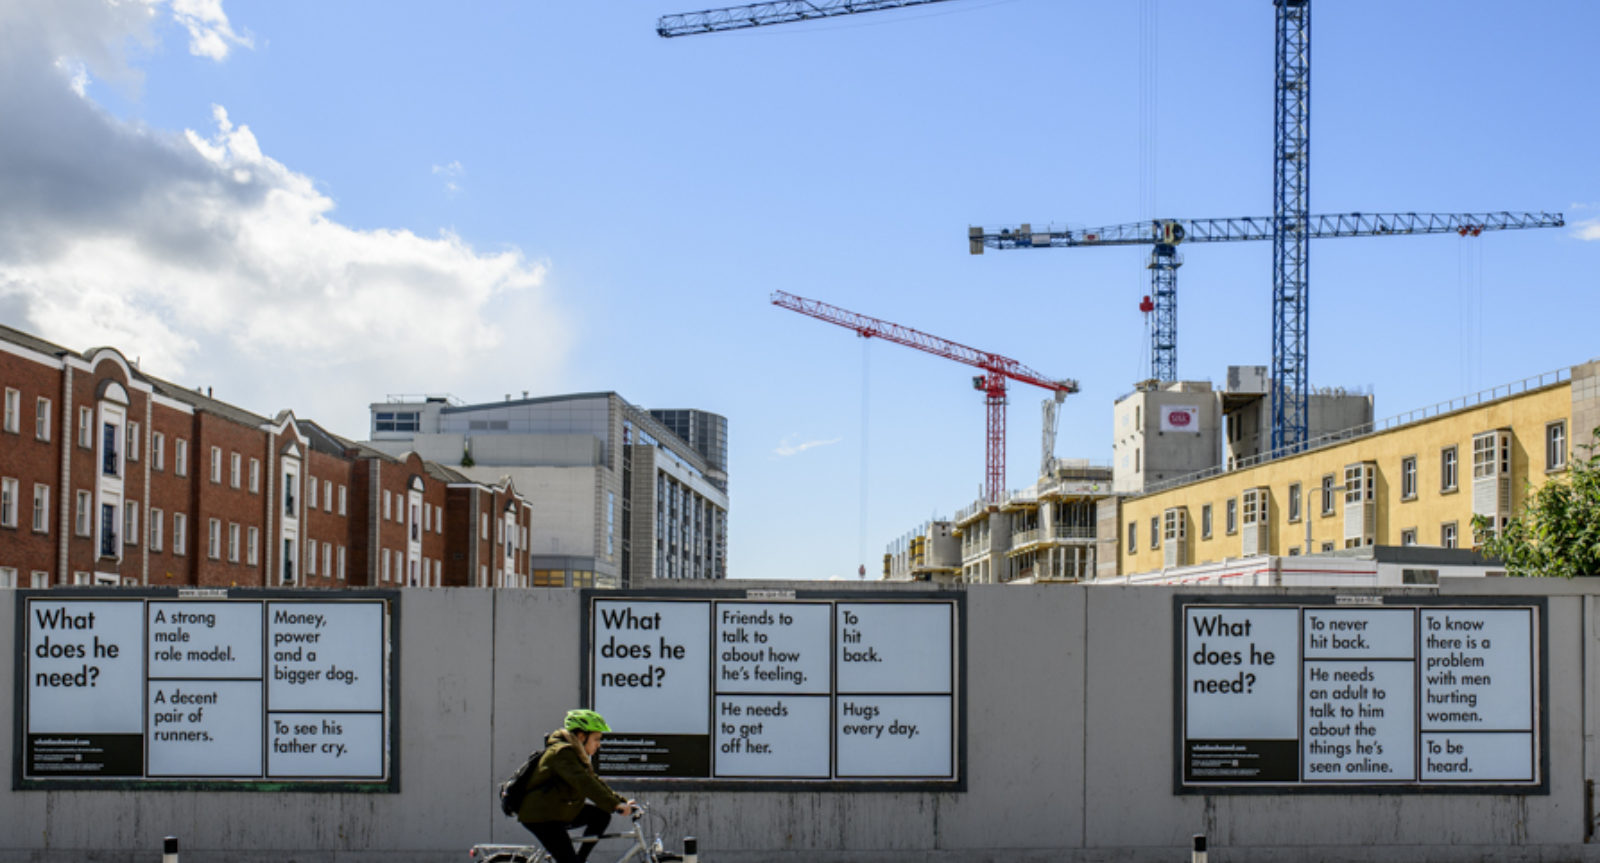 A series of black and white text based posters on an  outdoor wall asking "what does he need?". Cranes in the background and a cyclist passes in front